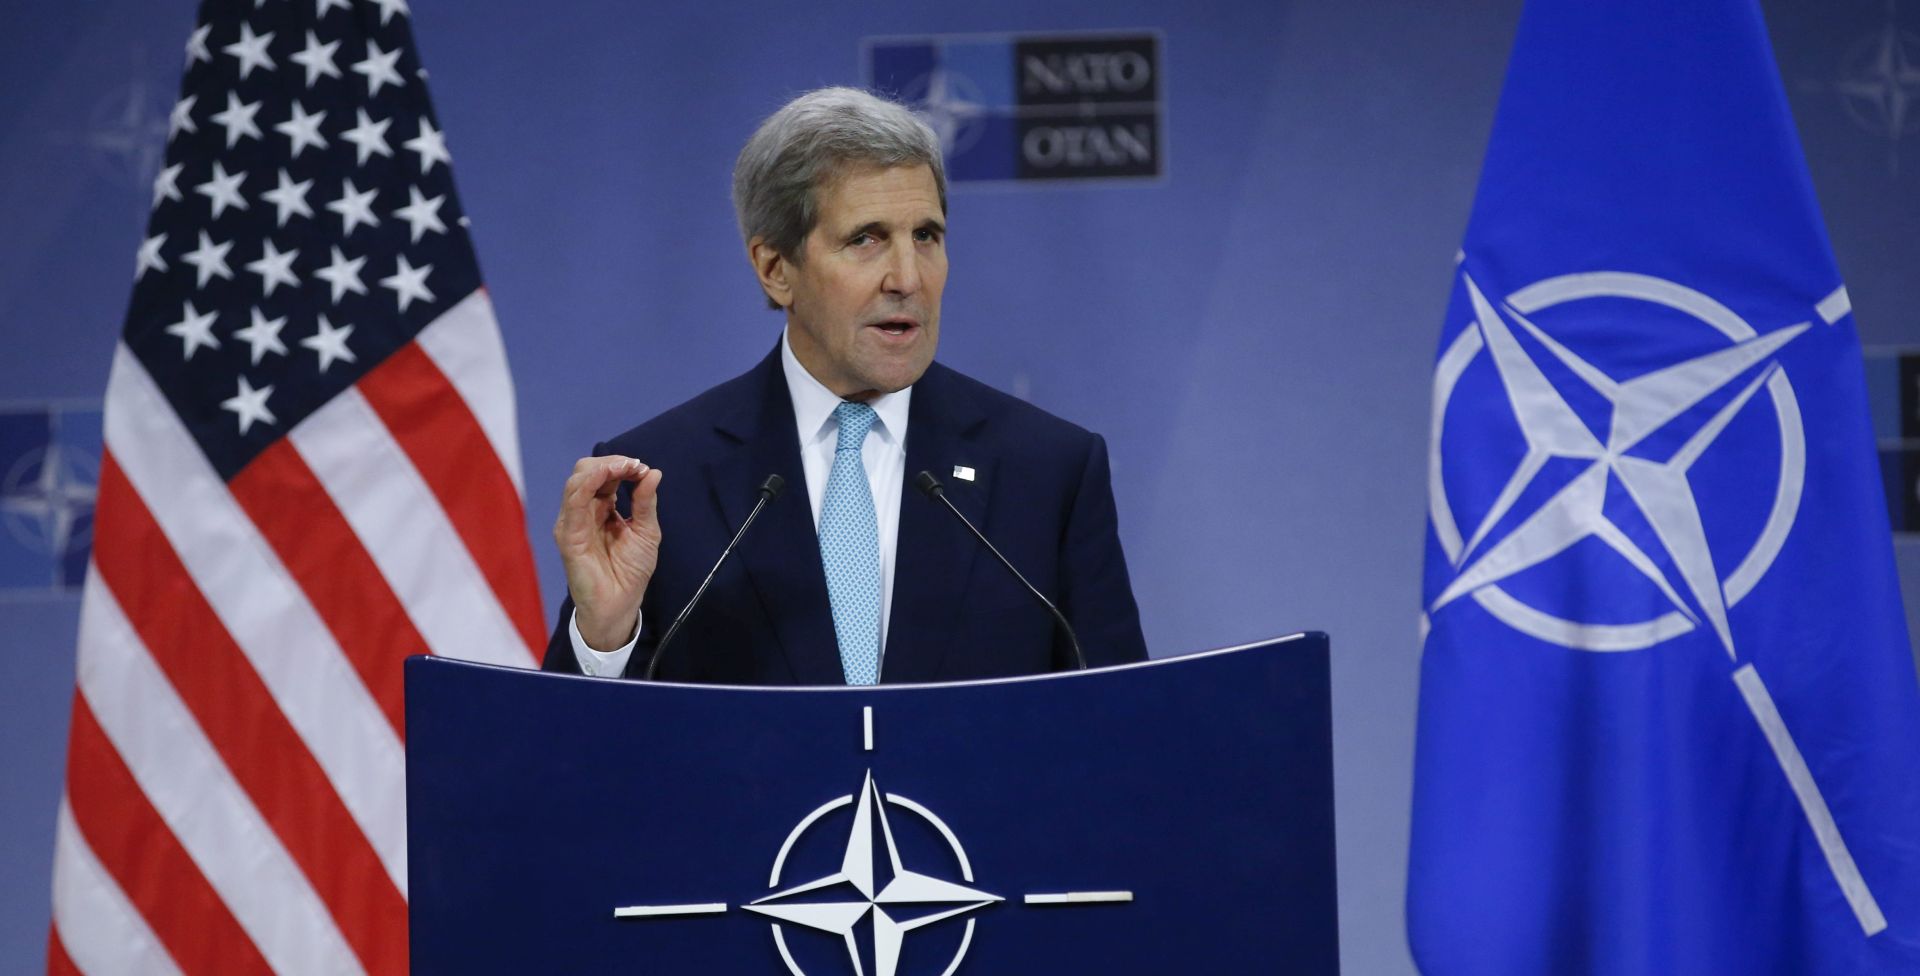 epa05051544 US Secretary of State John Kerry gestures stresses a point while speaking at a news conference following a NATO Foreign ministers meeting at the North Atlantic Treaty Organization's (NATO) headquarters in Brussels, Belgium, 02 December 2015. NATO foreign ministers earlier this morning had decided to invite Montenegro to become the 29th member of the NATO alliance.  EPA/OLIVIER HOSLET